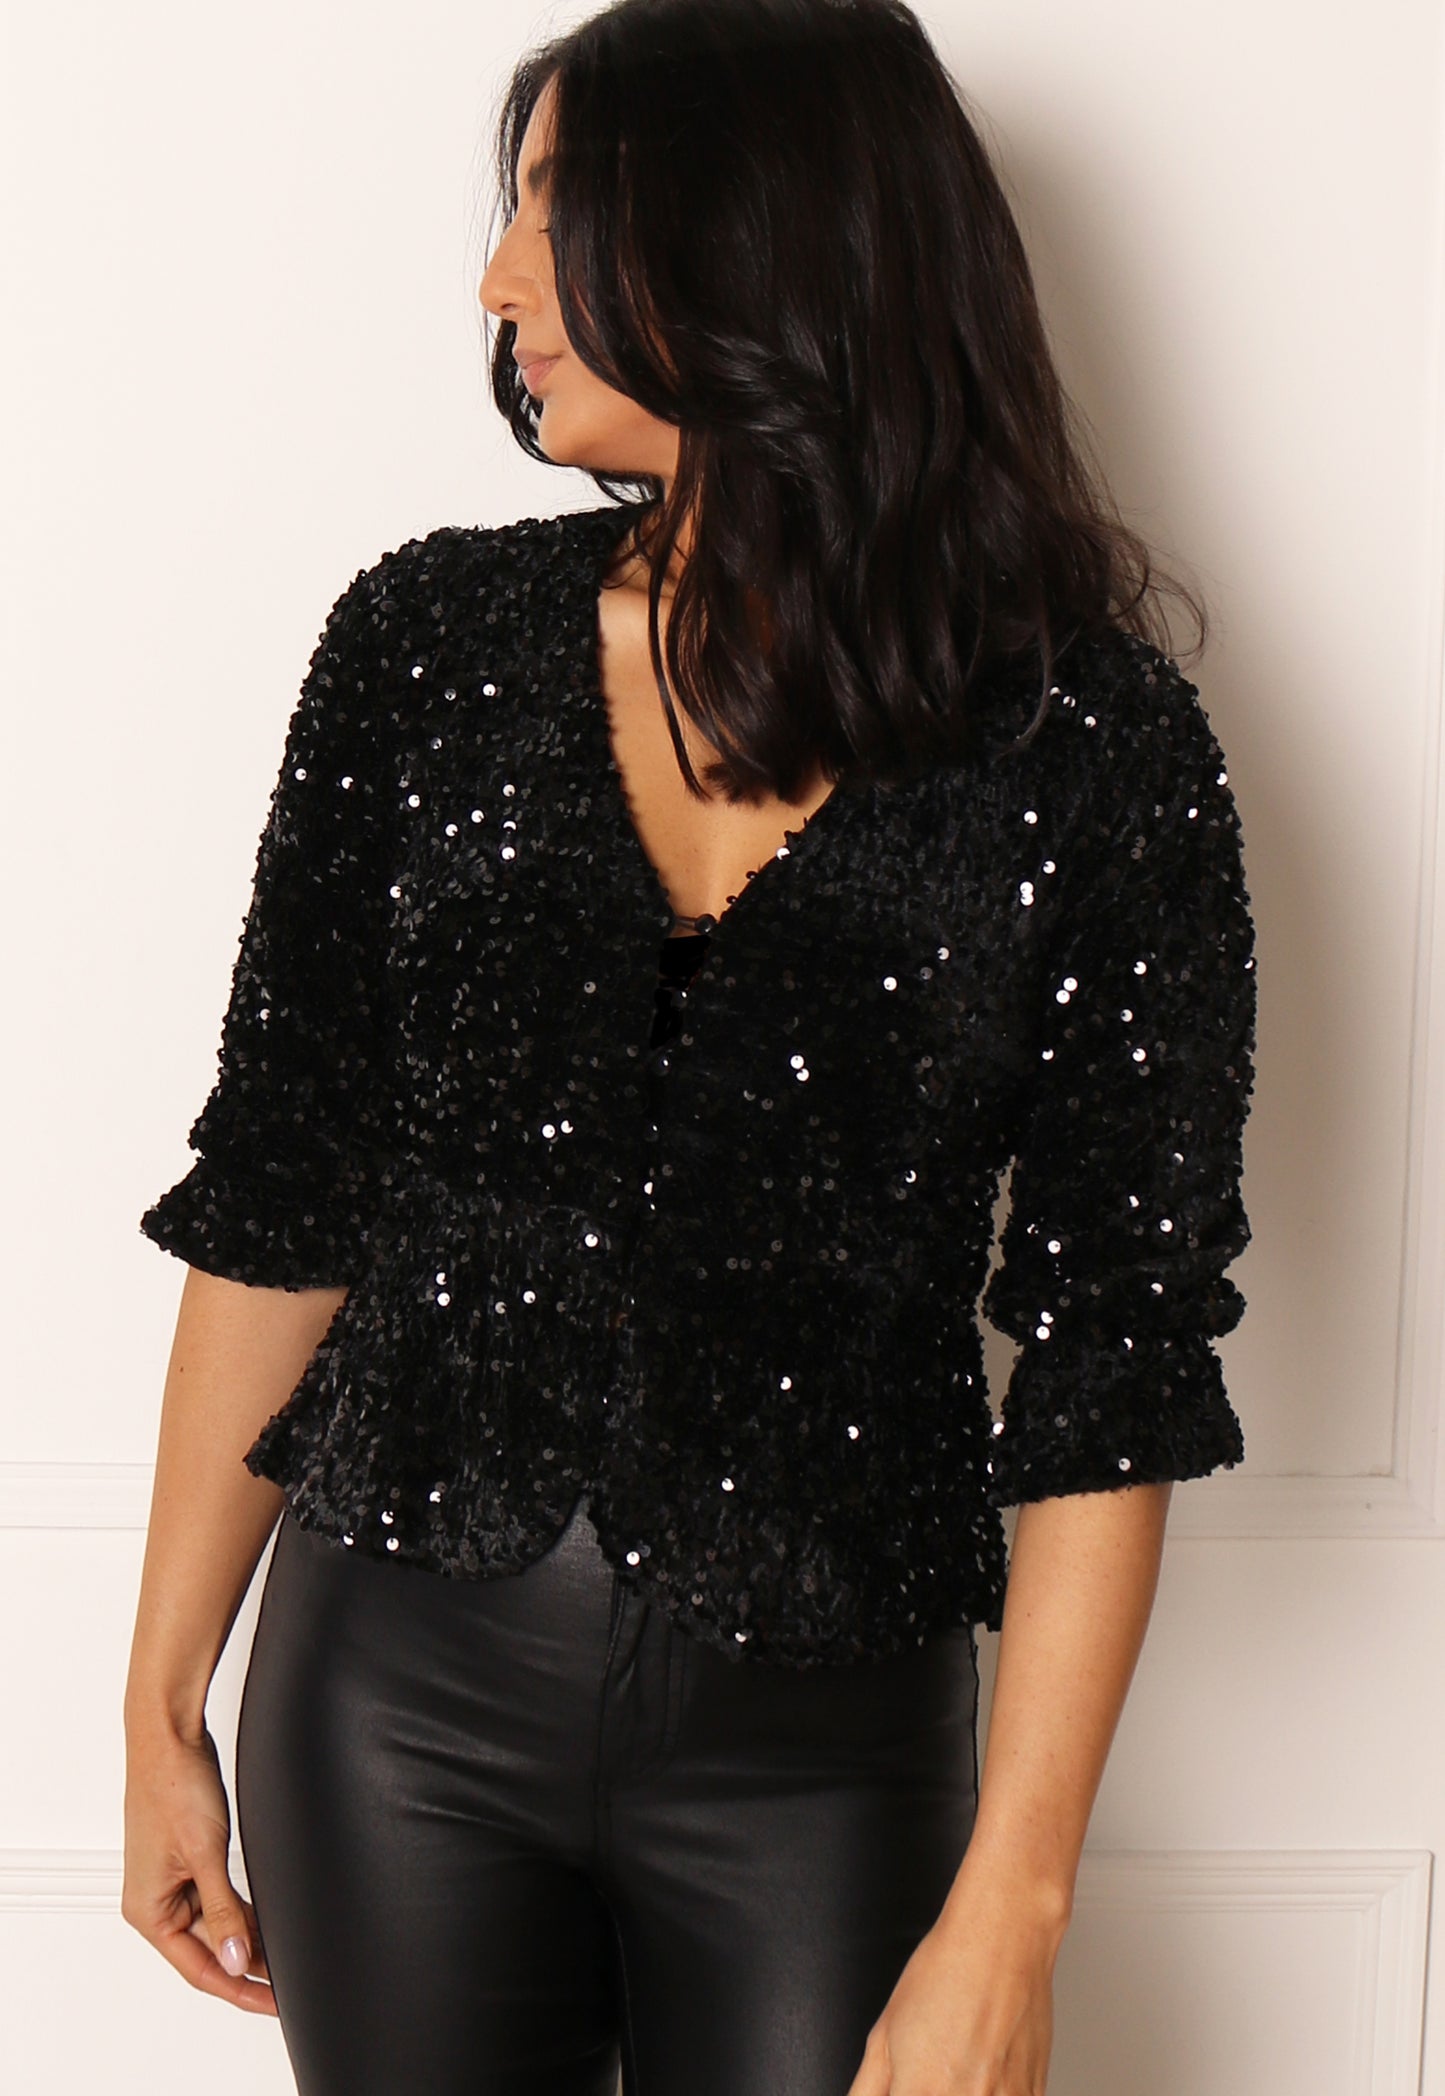 ONLY Anika Sequin & Velvet Button Up Peplum Top in Black - One Nation Clothing